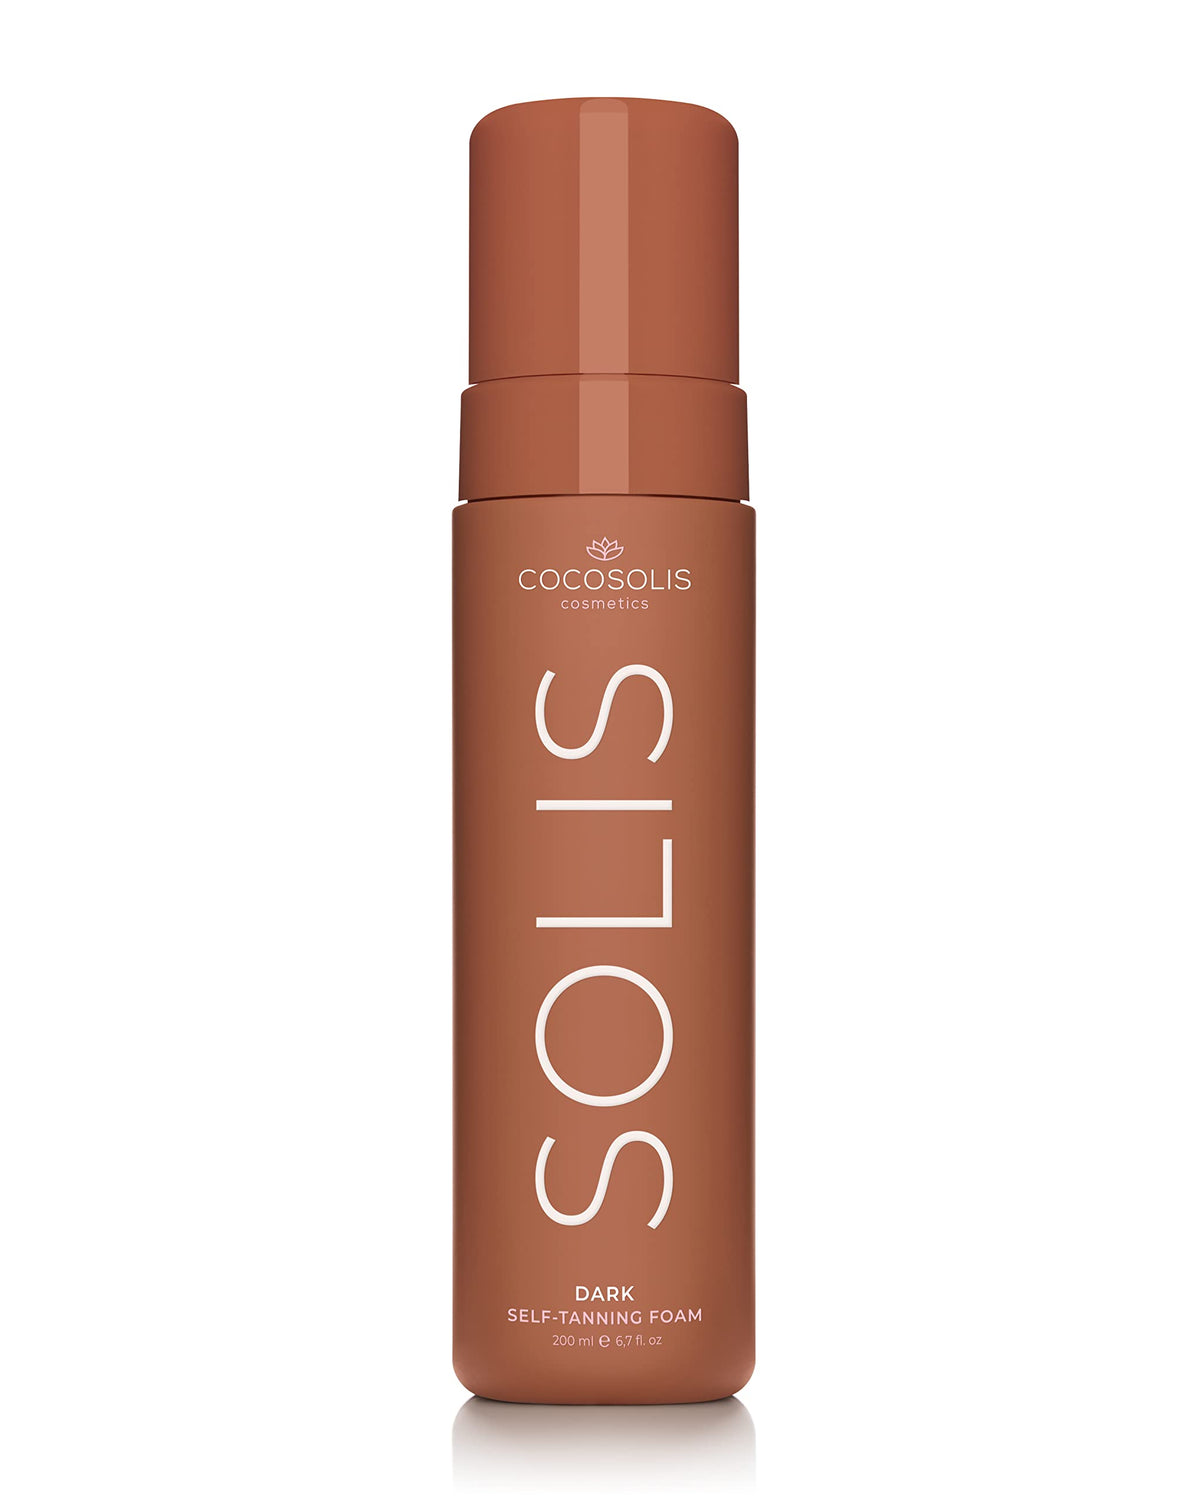 COCOSOLIS SOLIS Dark self-tanning lotion for face and body, mousse for a rich, natural and long-lasting tan, with plant-based DHA (200 ml)